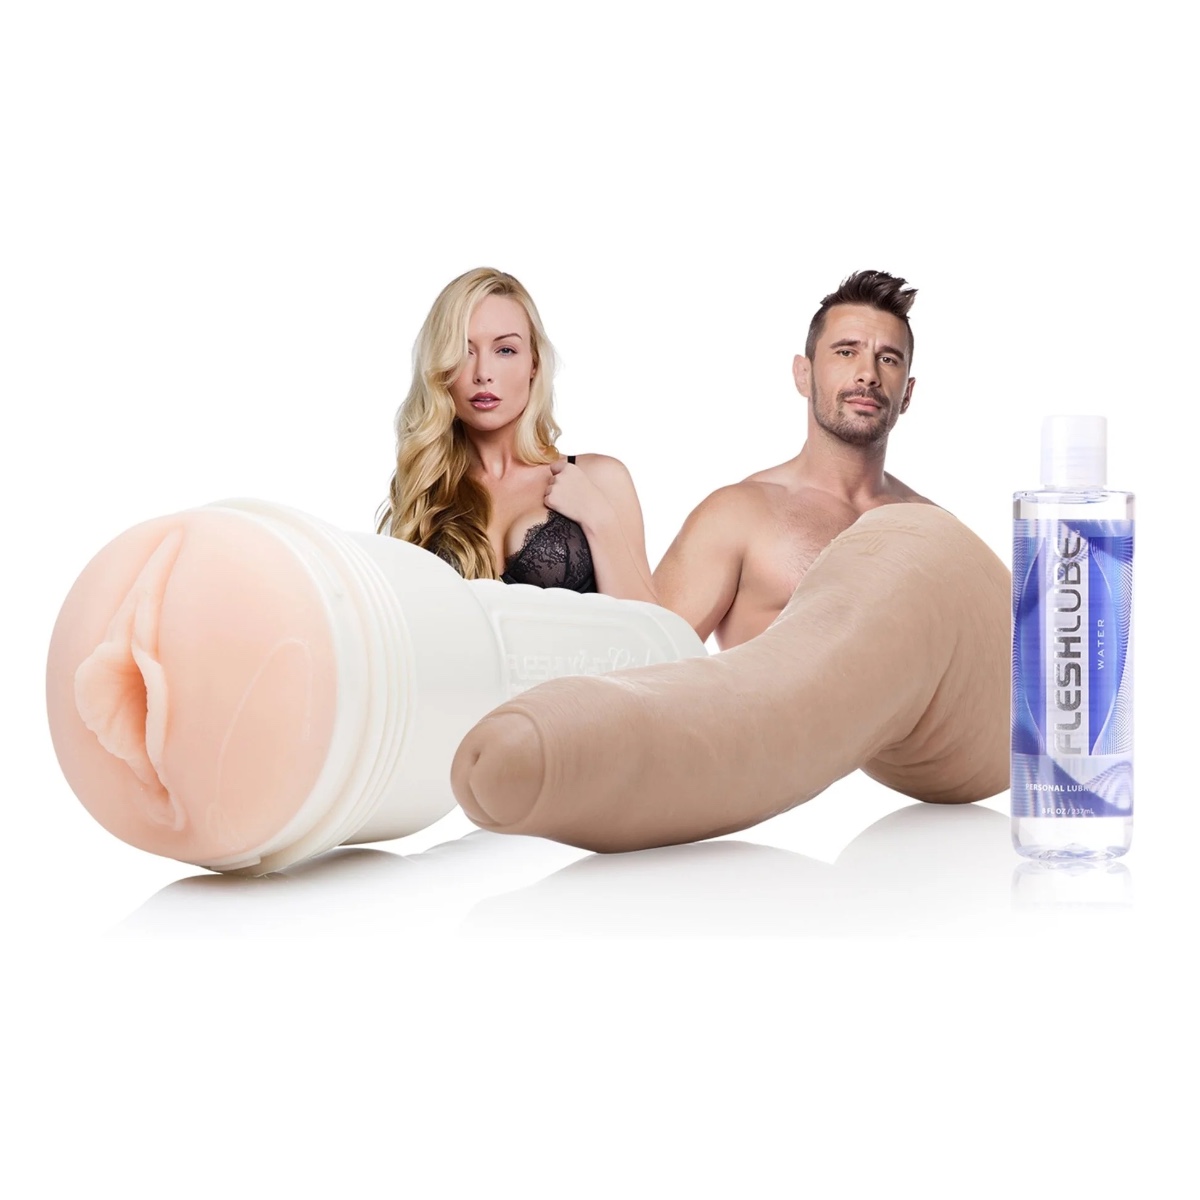 Fleshlight for Couples: How to Incorporate It into Your Relationship